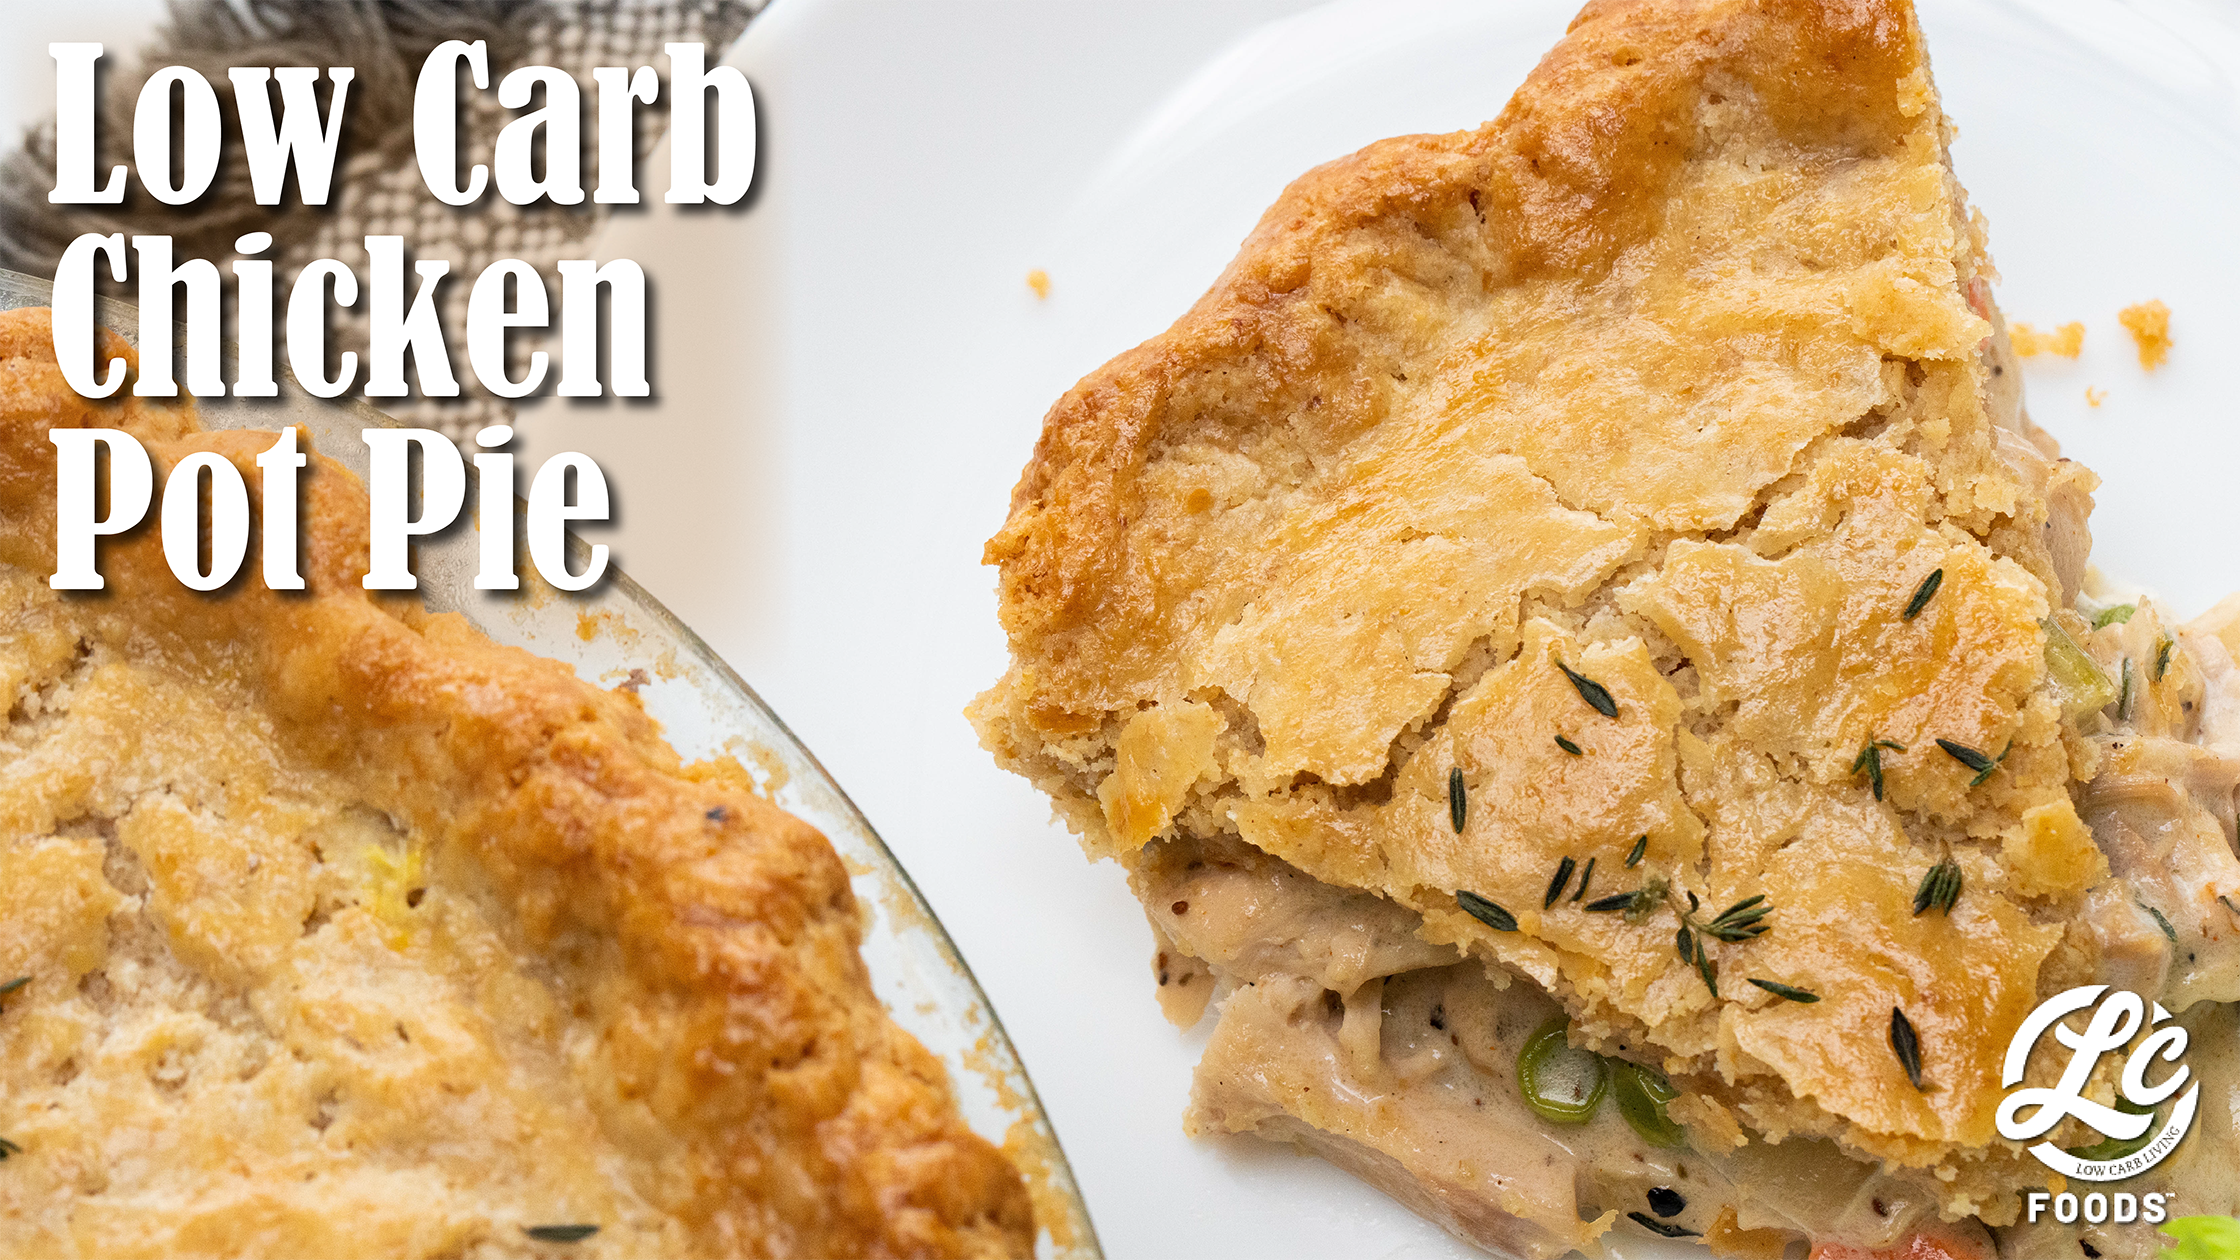 Thumbnail for Low Carb Chicken Pot Pie